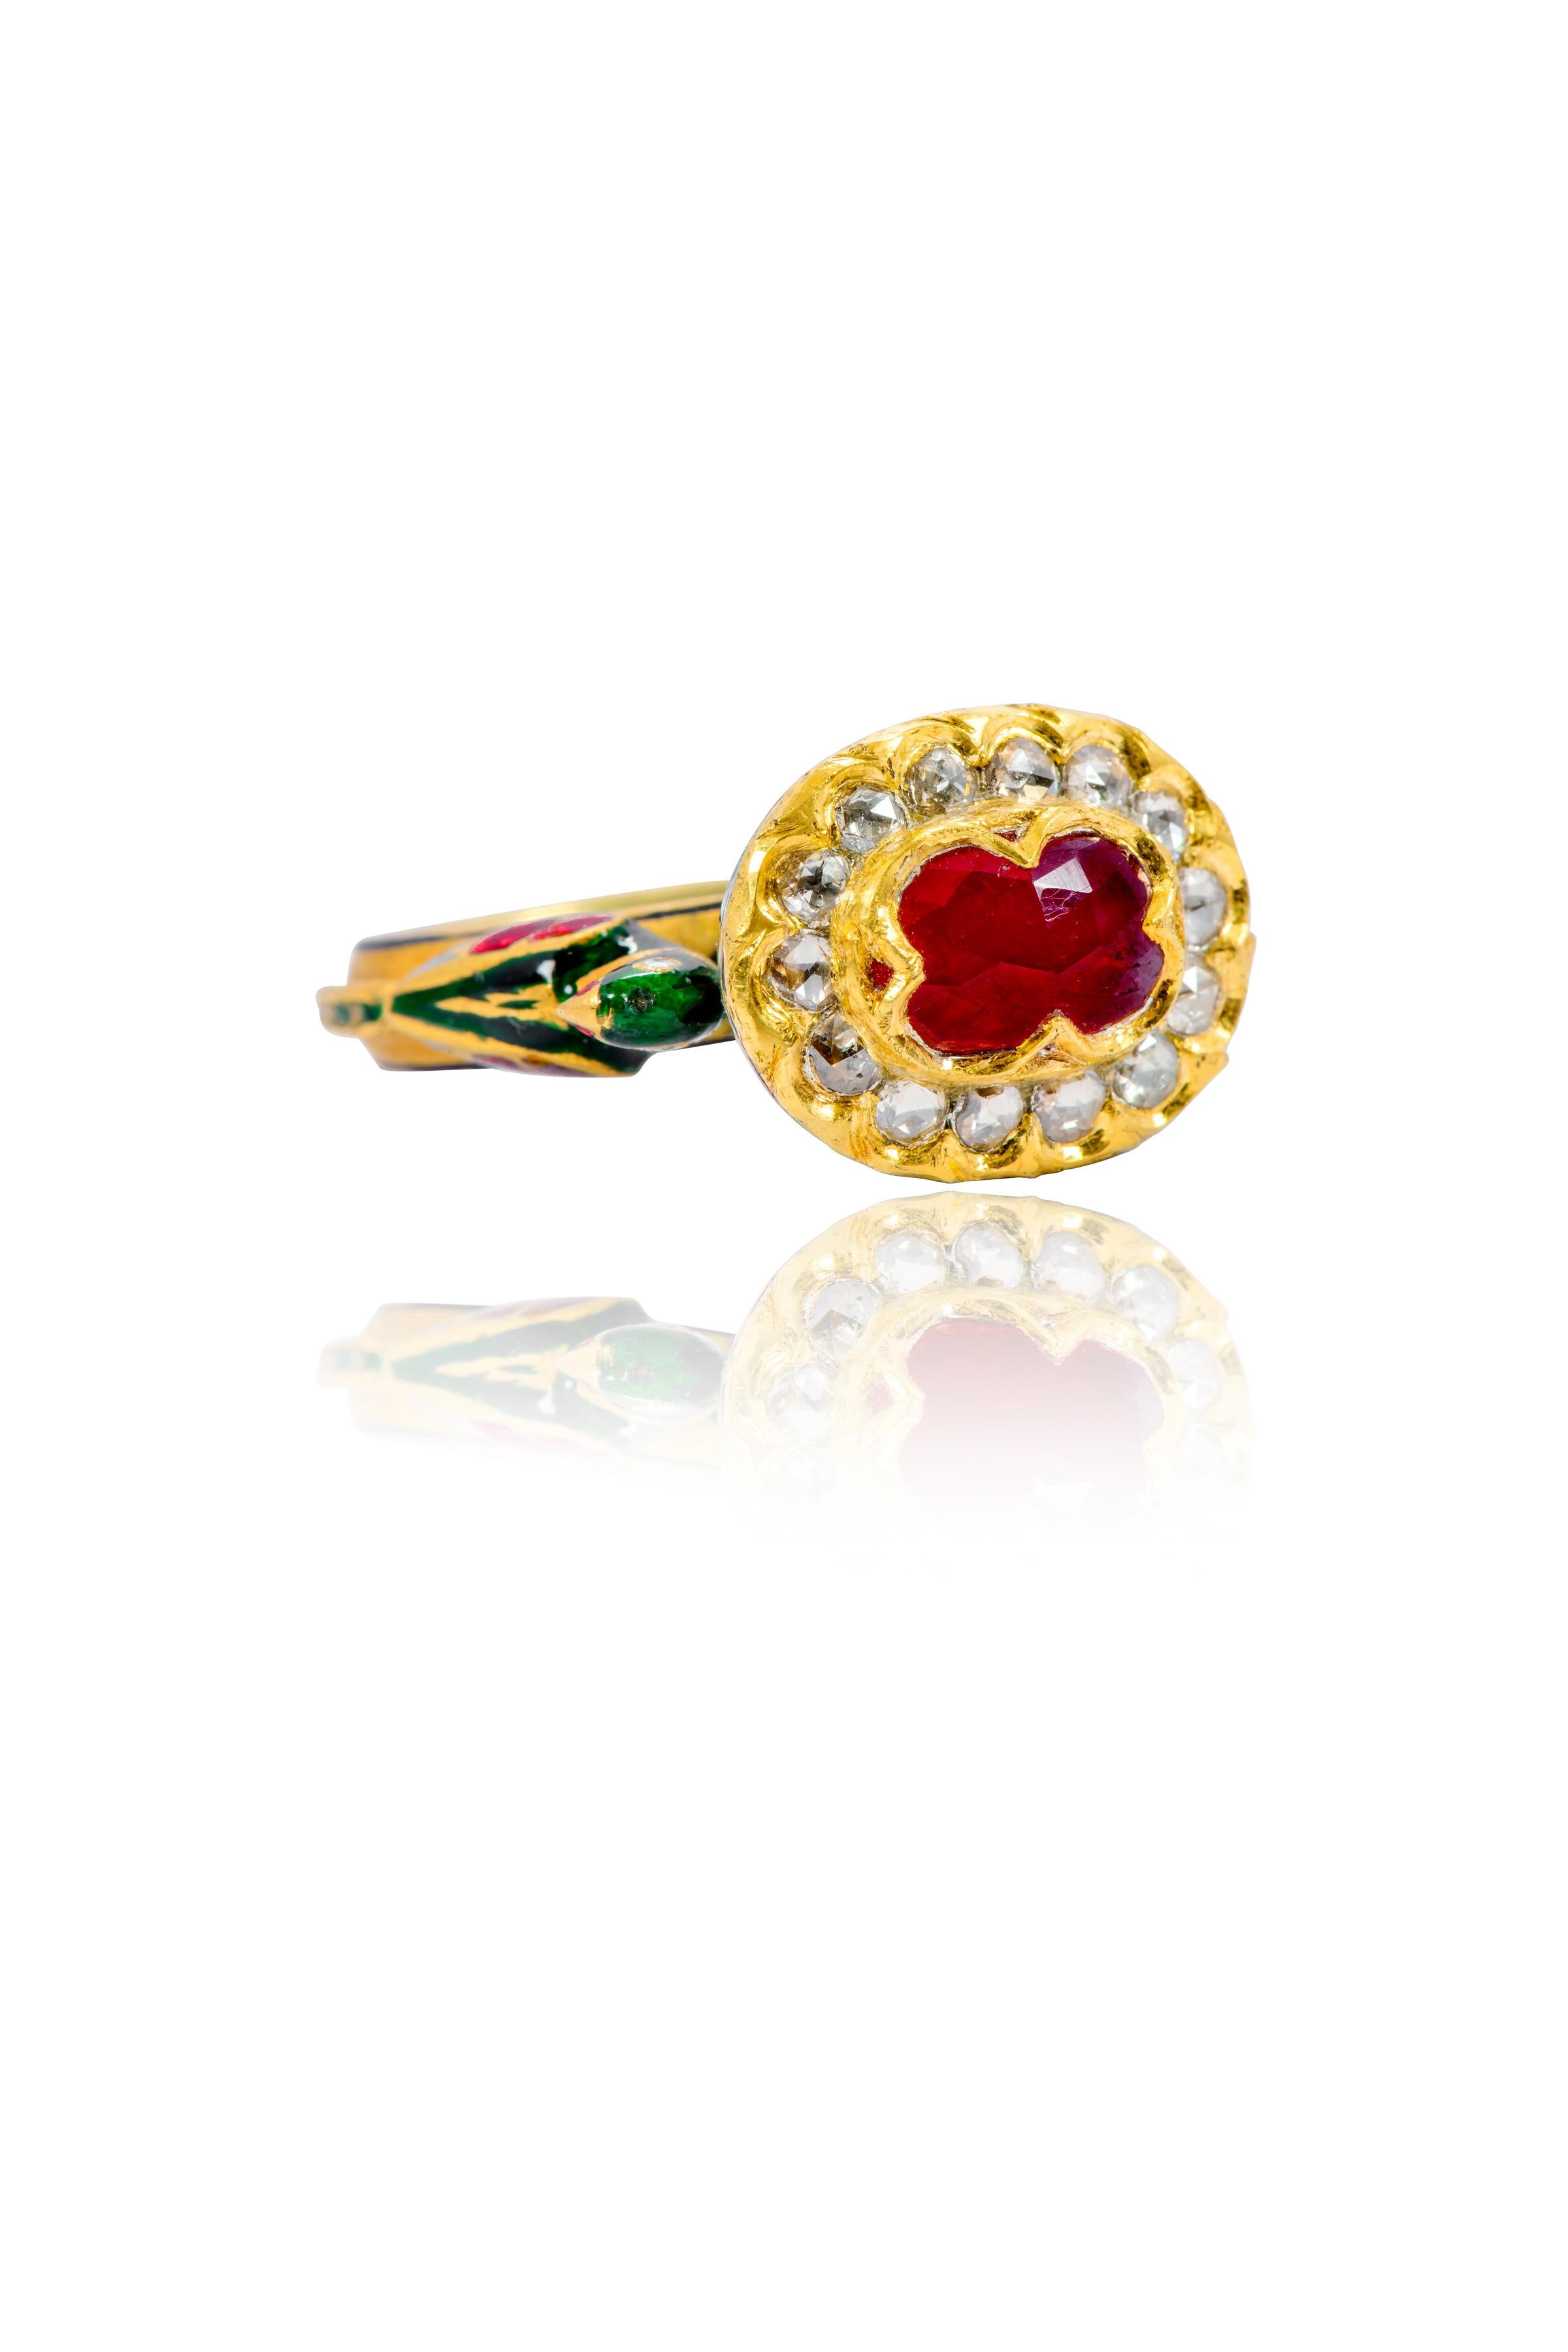 Anglo-Indian 22 Karat Yellow Gold Ruby and Diamond Statement Bird Ring Handcrafted